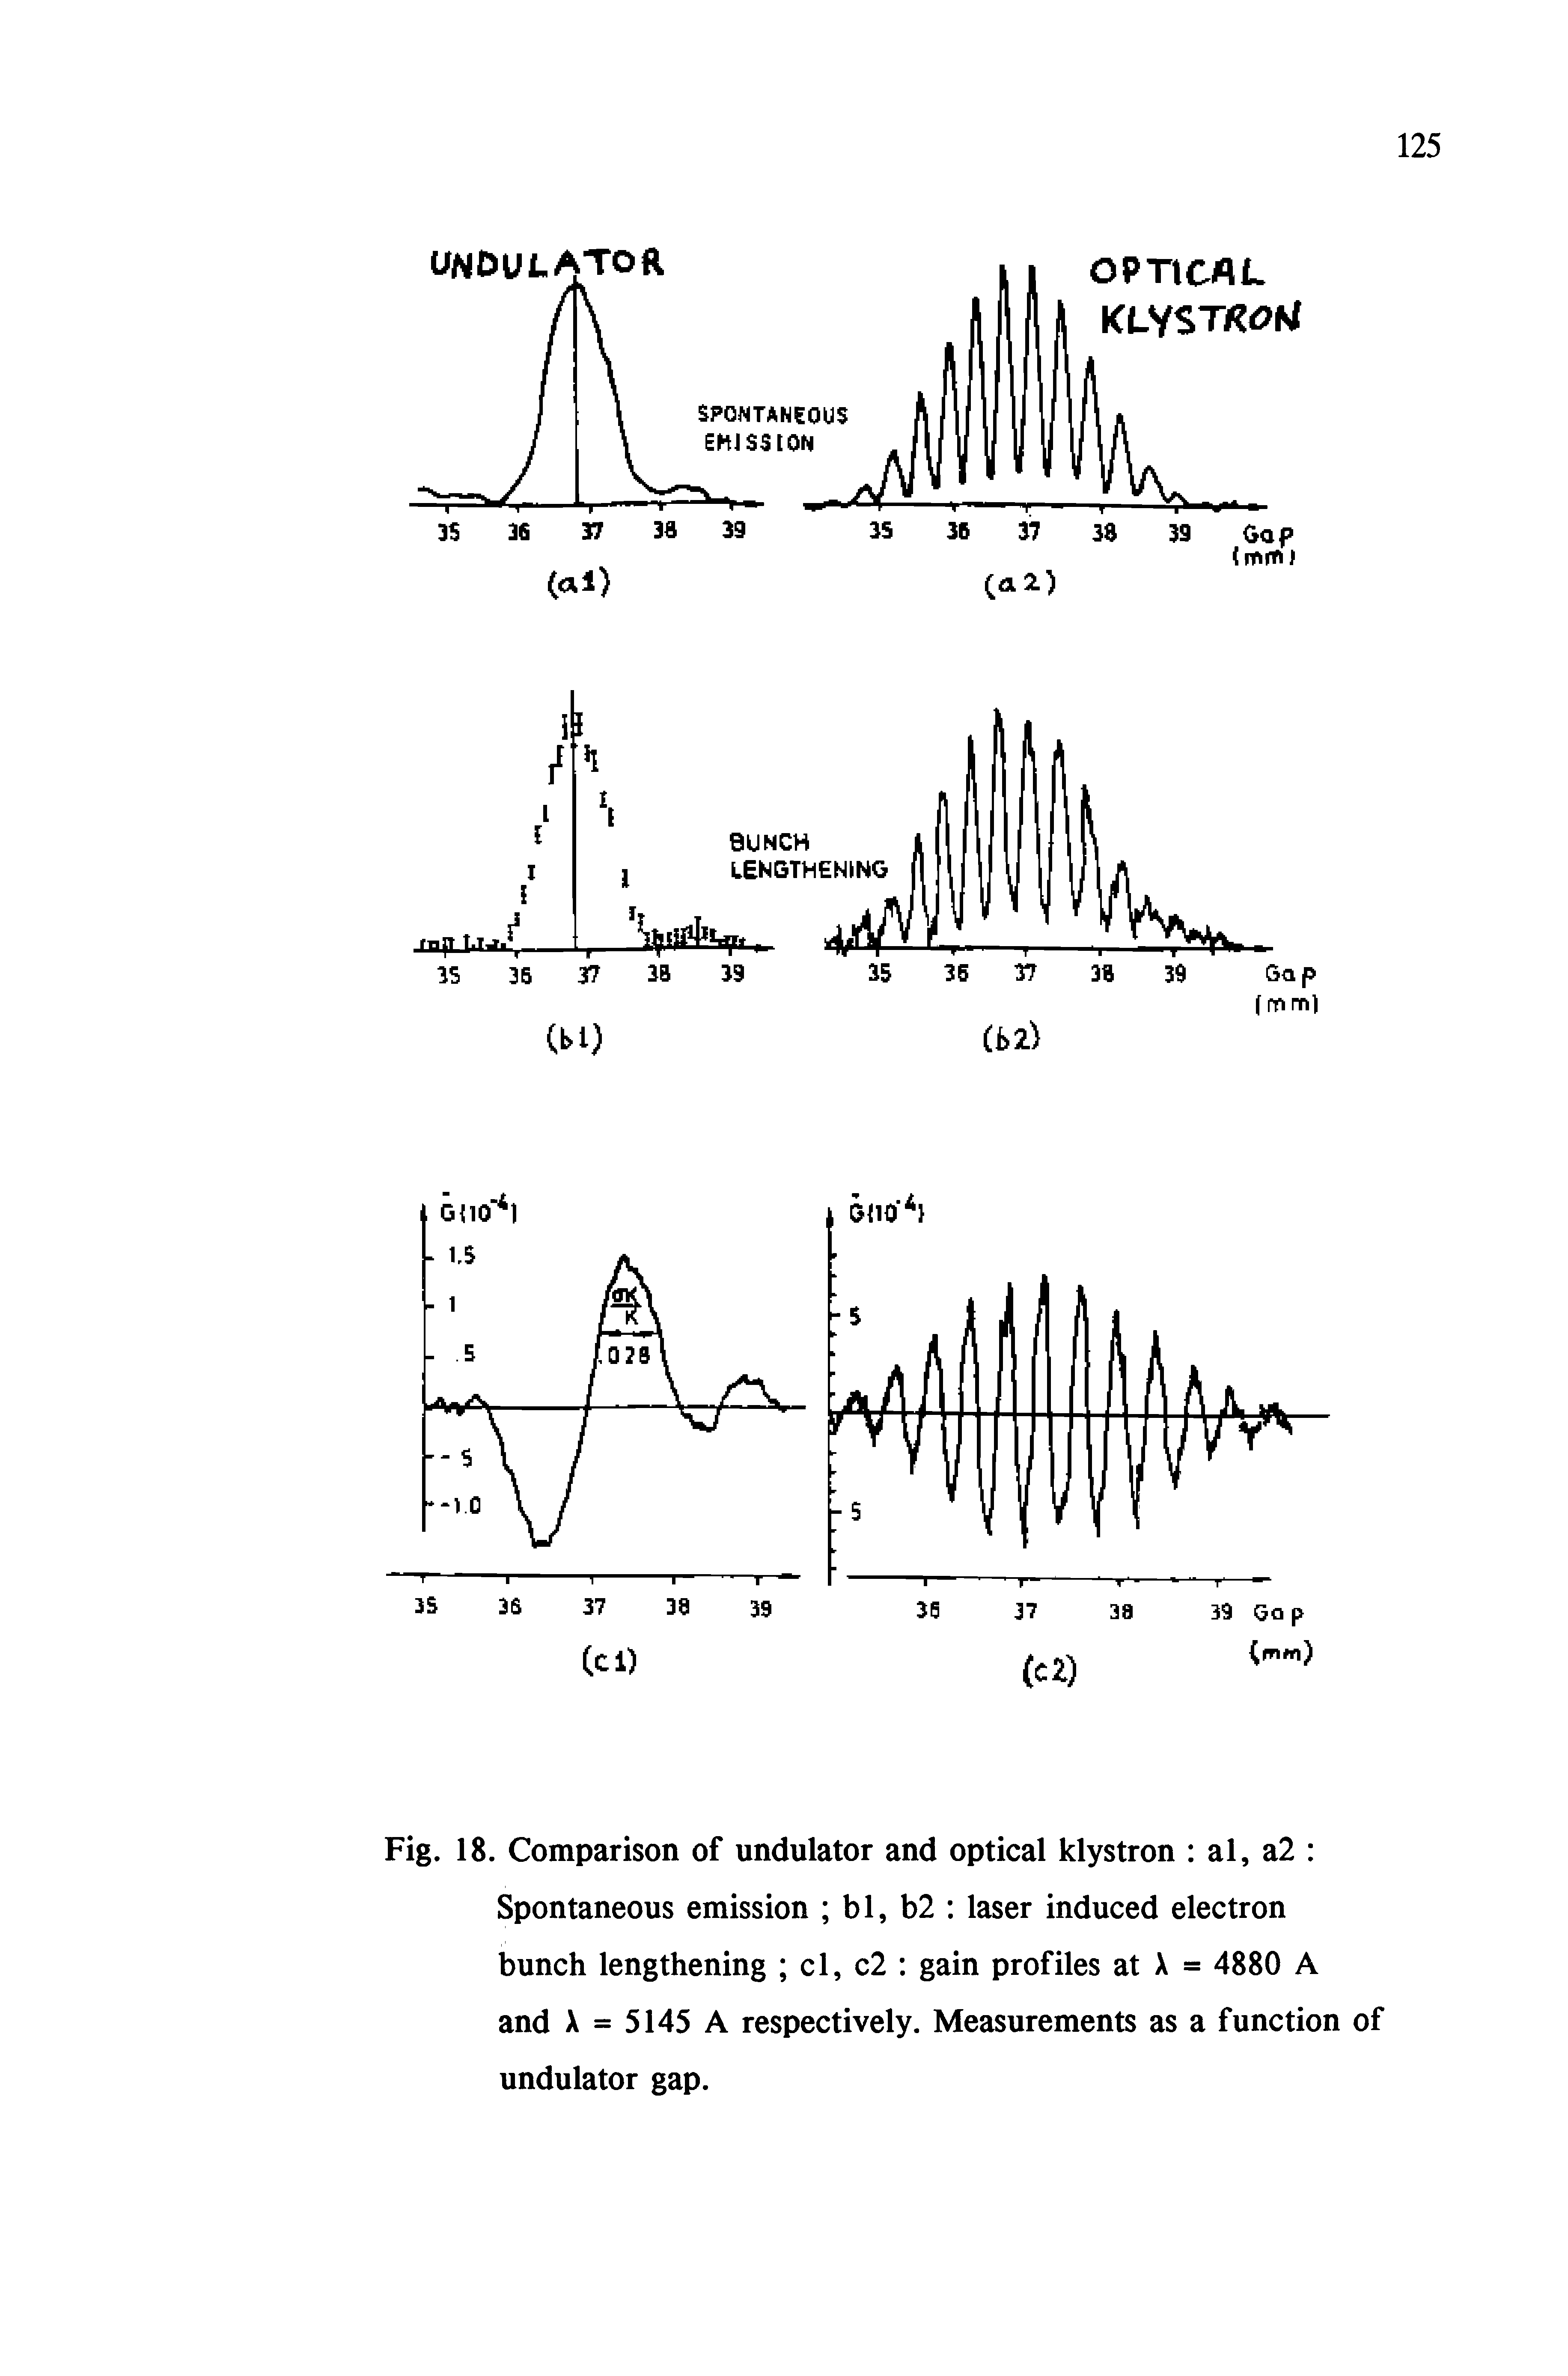 Fig. 18. Comparison of undulator and optical klystron al, a2 Spontaneous emission bl, b2 laser induced electron bunch lengthening cl, c2 gain profiles at X = 4880 A and X = 5145 A respectively. Measurements as a function of undulator gap.